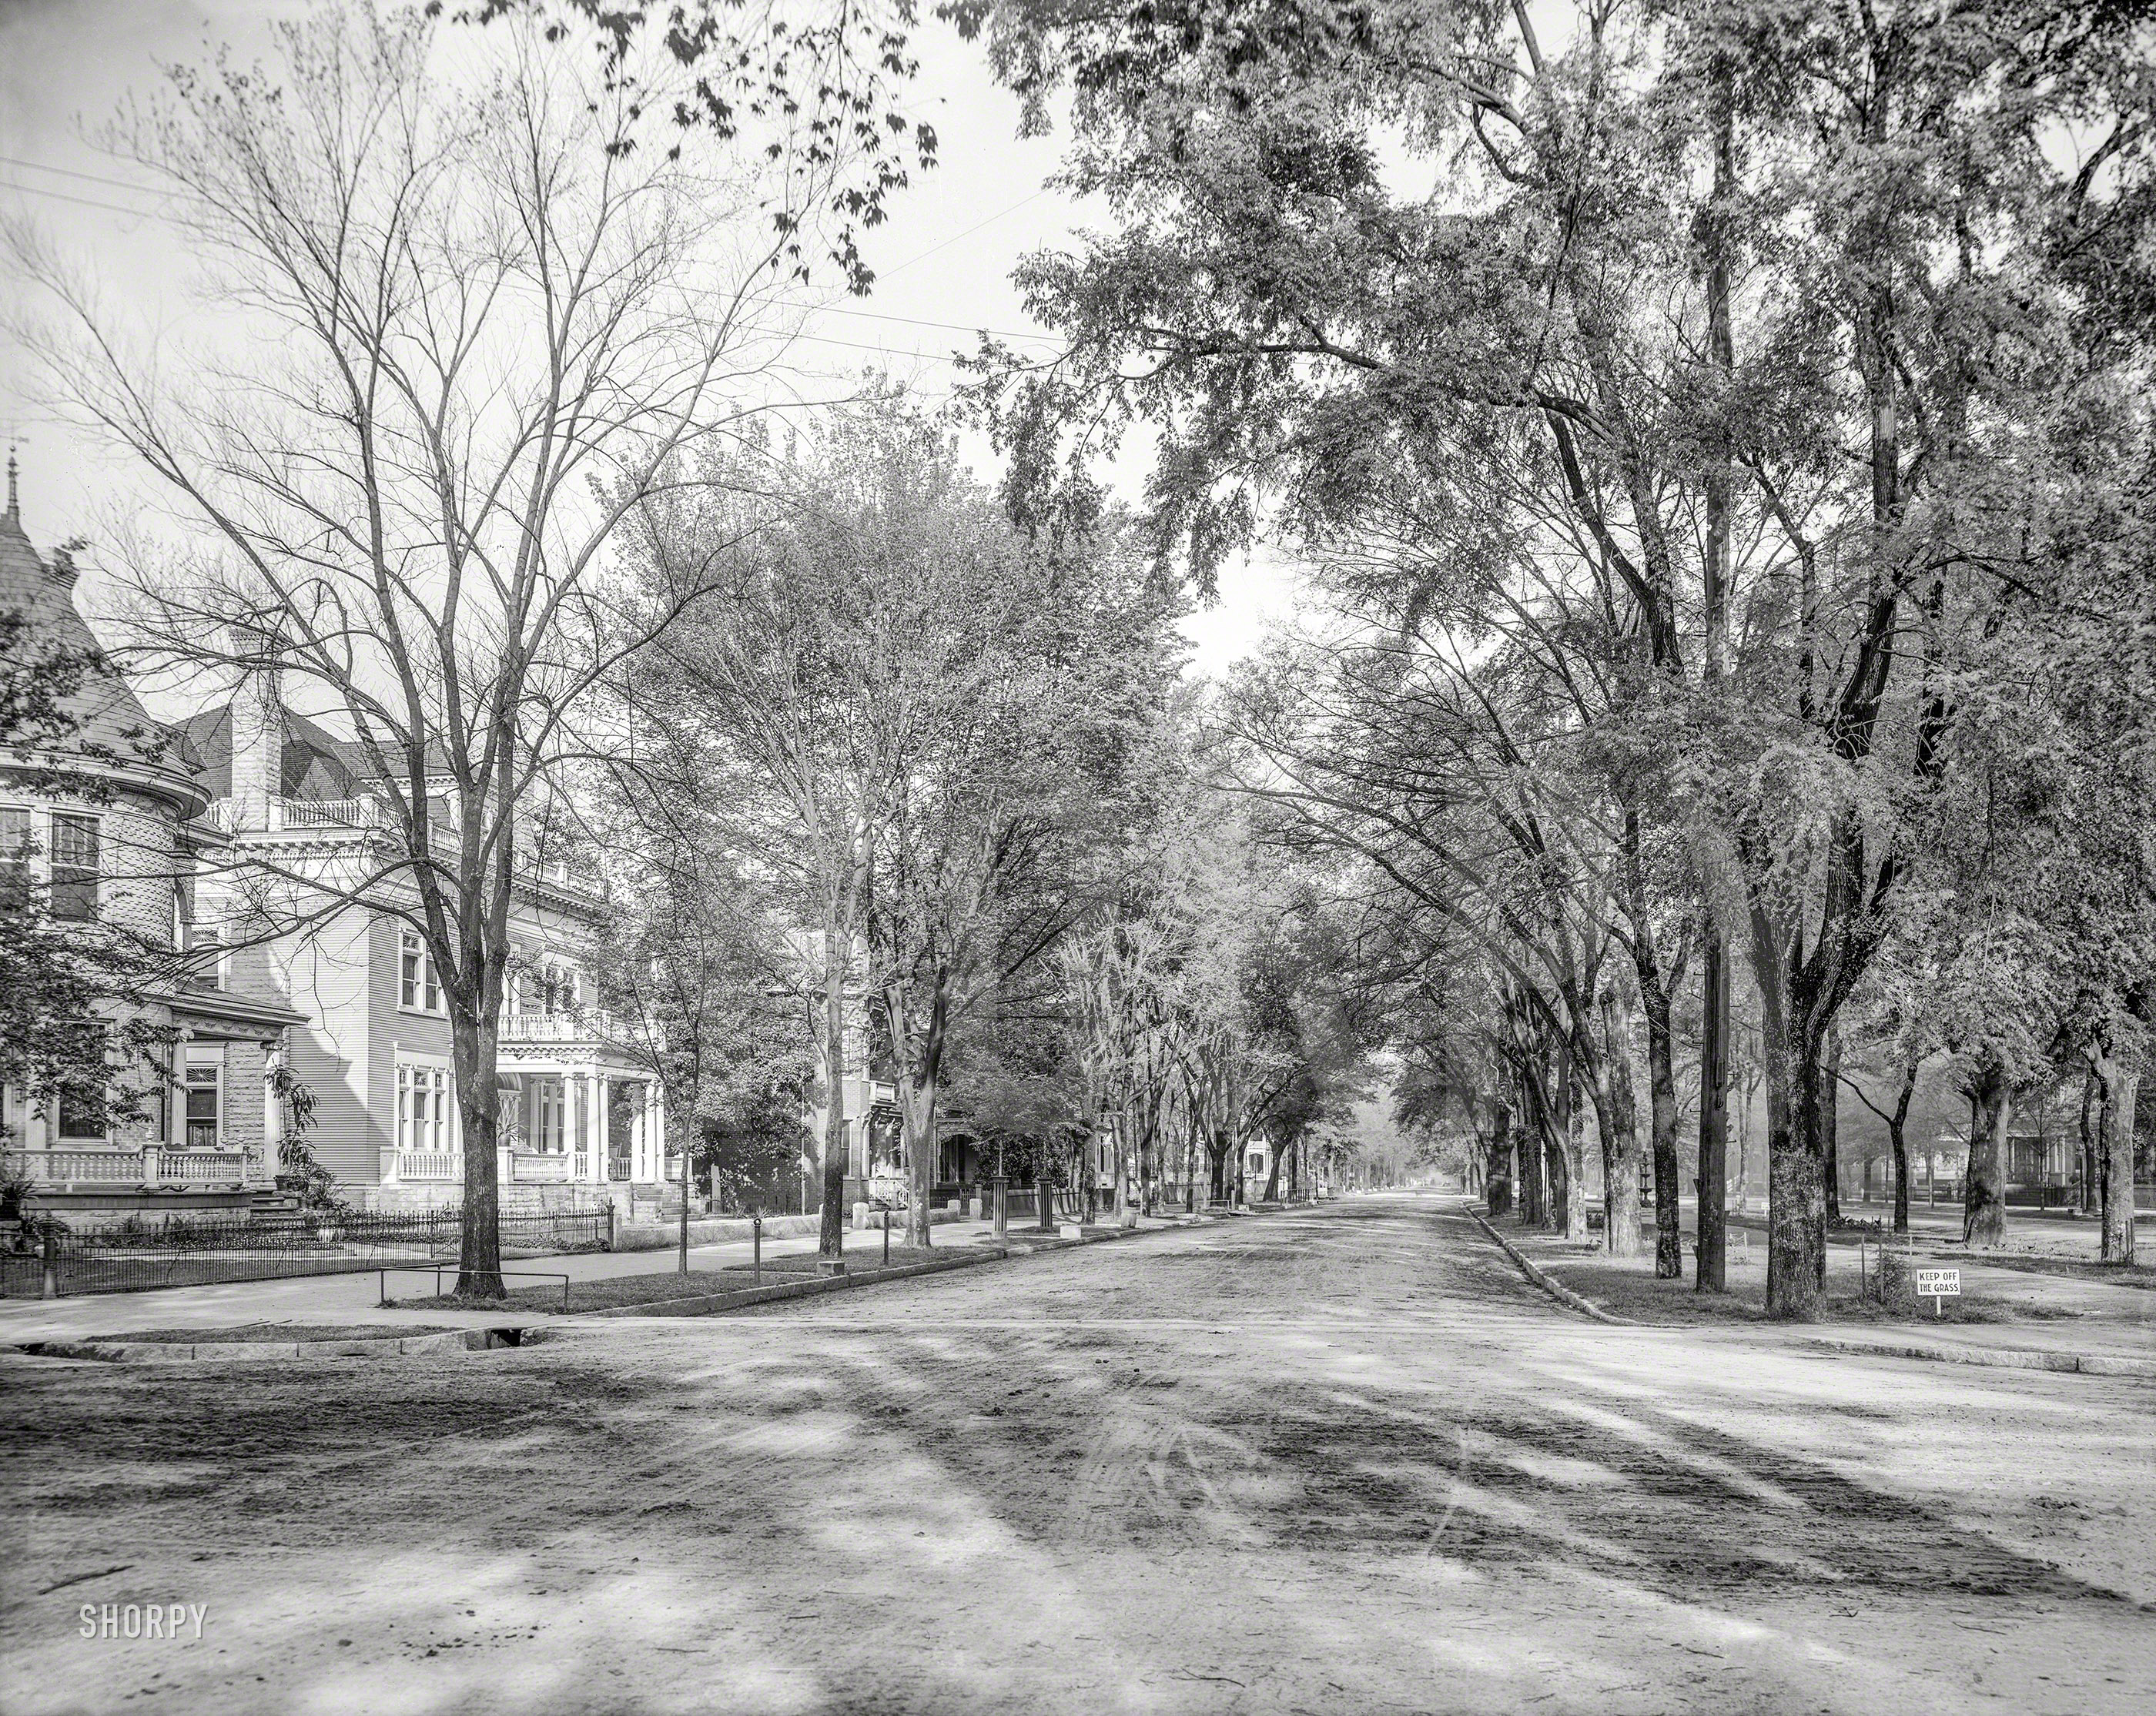 1903. "Greene Street, Augusta, Georgia." When mounting blocks and hitching posts were as common as curbstones. 8x10 glass negative. View full size.